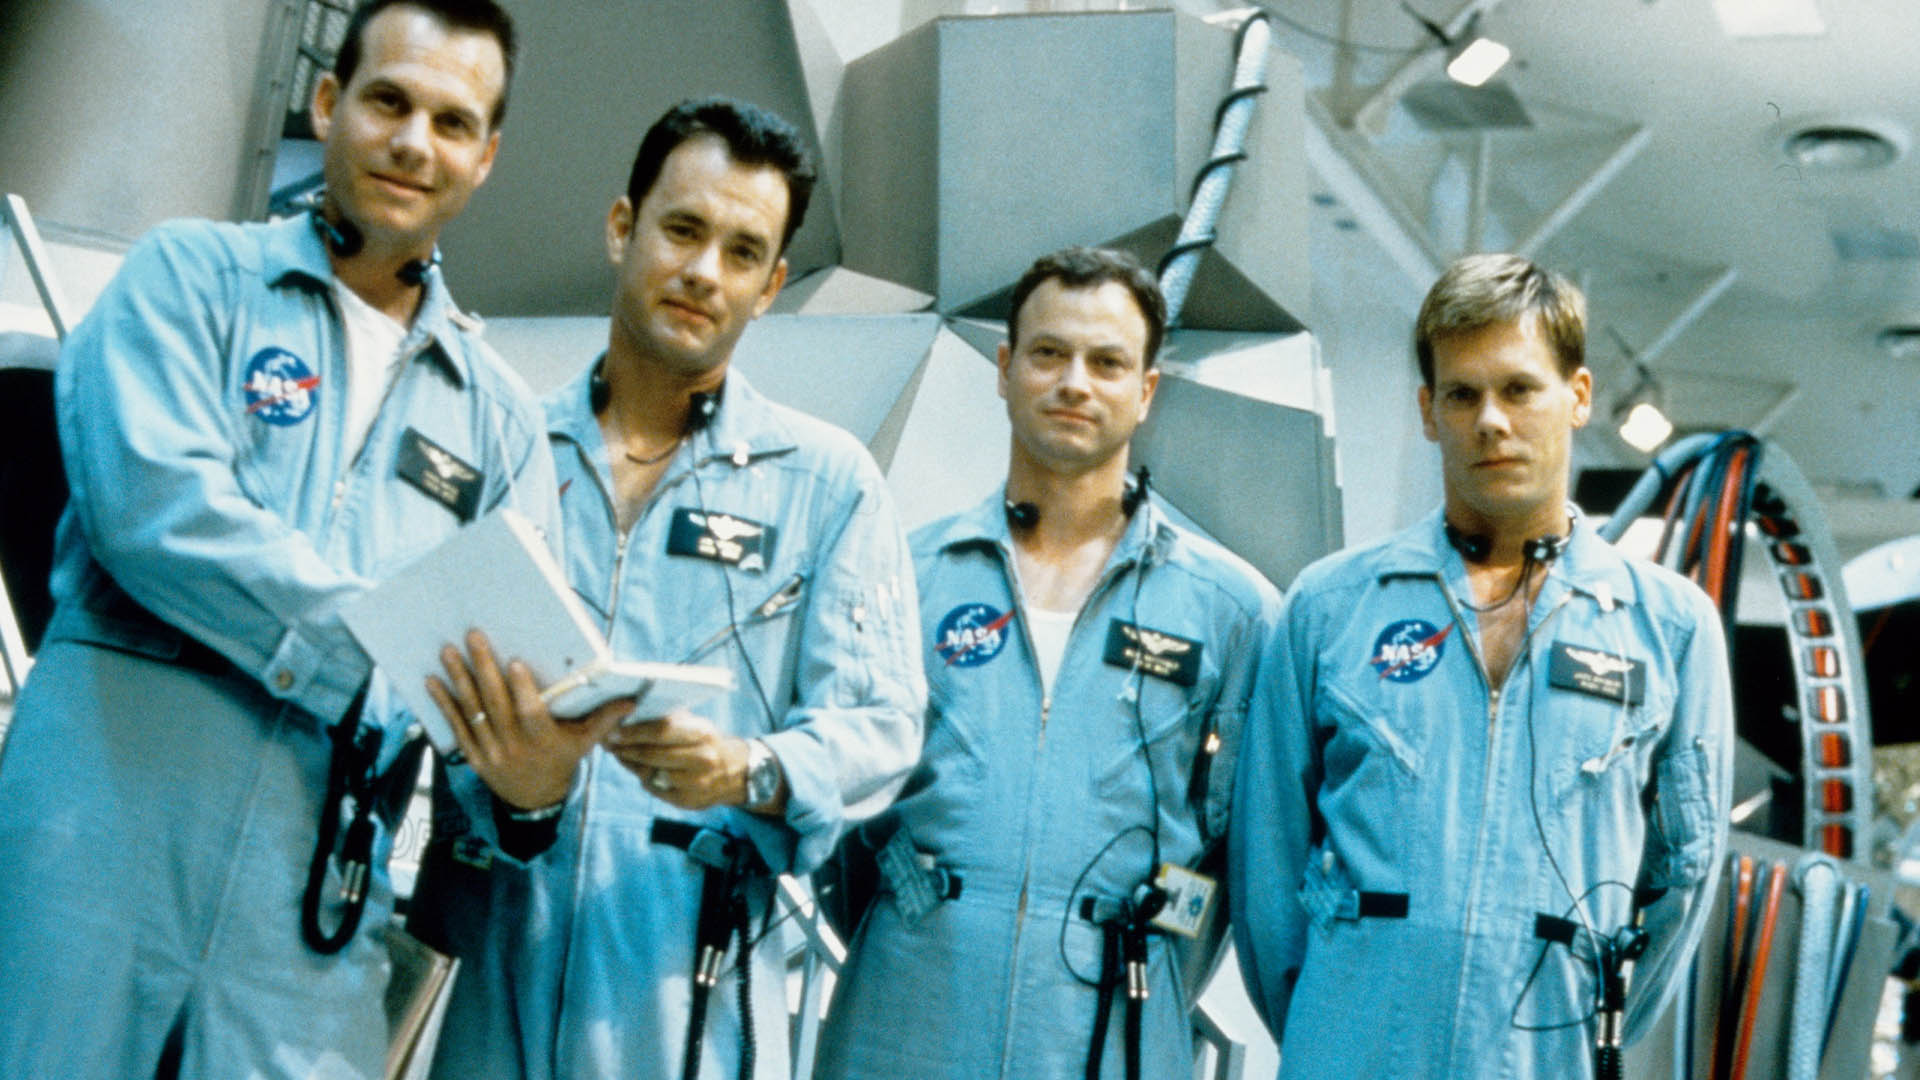 The main characters of the movie Apollo 13 in astronaut suits